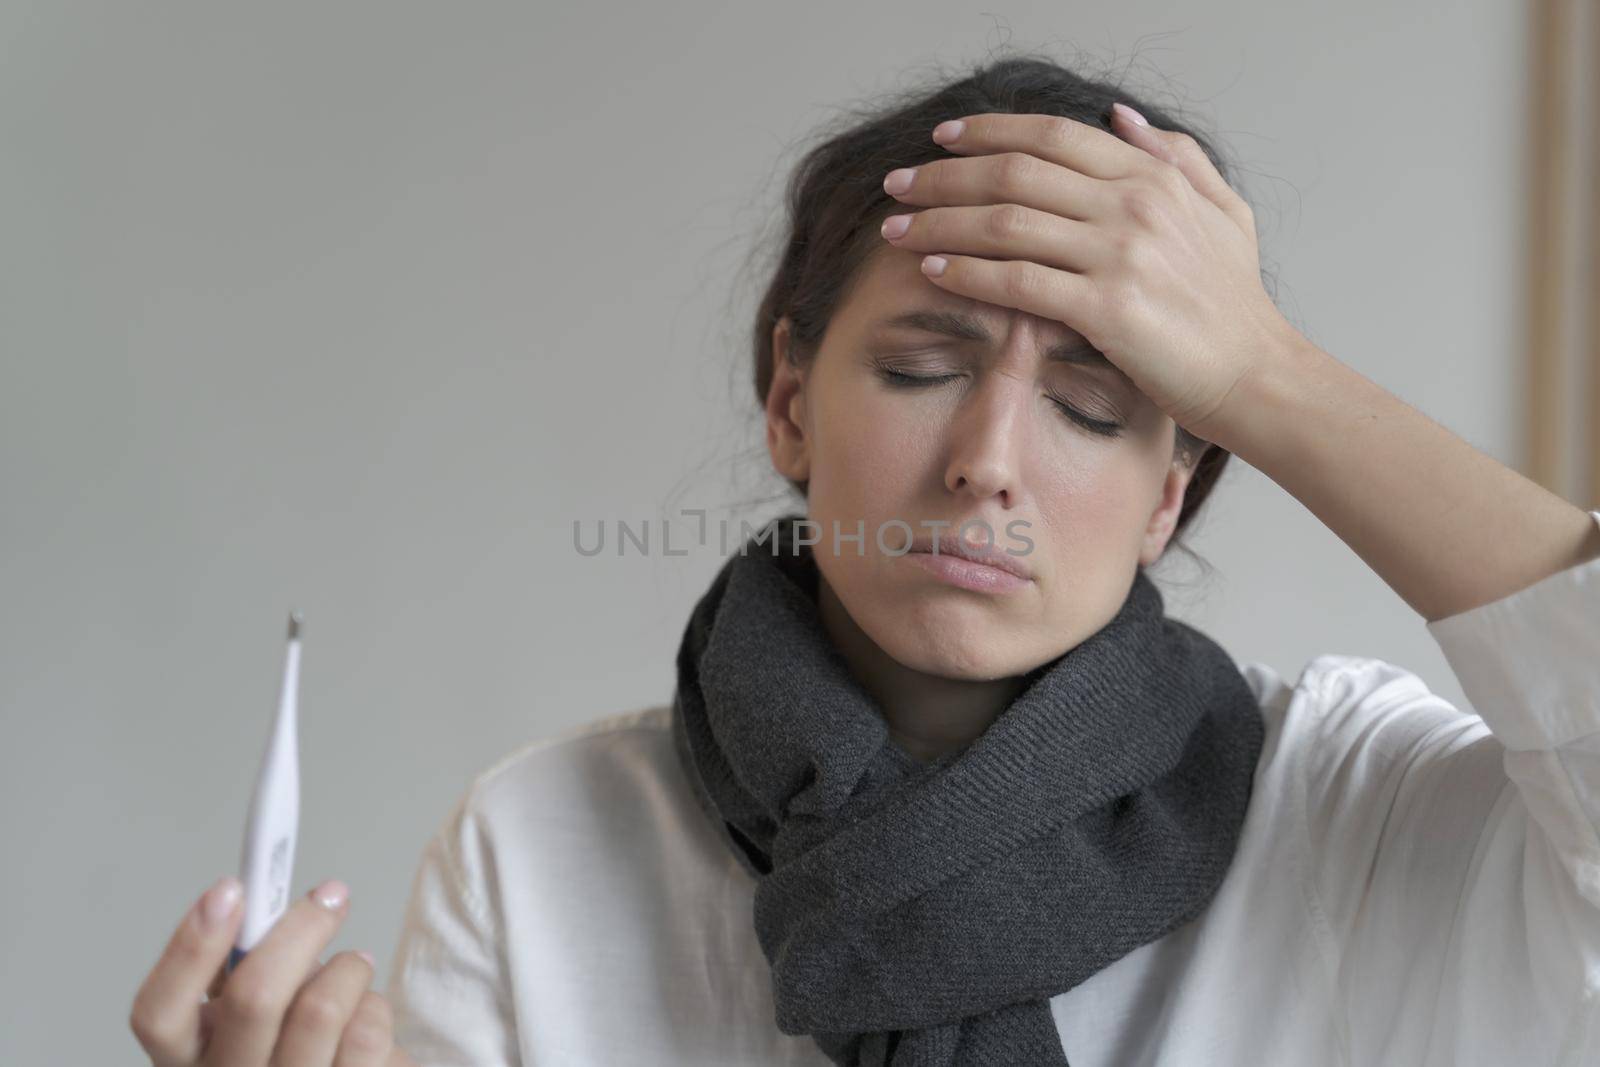 Italian entrepreneur lady tormented by hard work and fever, stands with closed eyes at home interior with warm scarf around her neck, while one hand on forehead and another holding digital thermometer